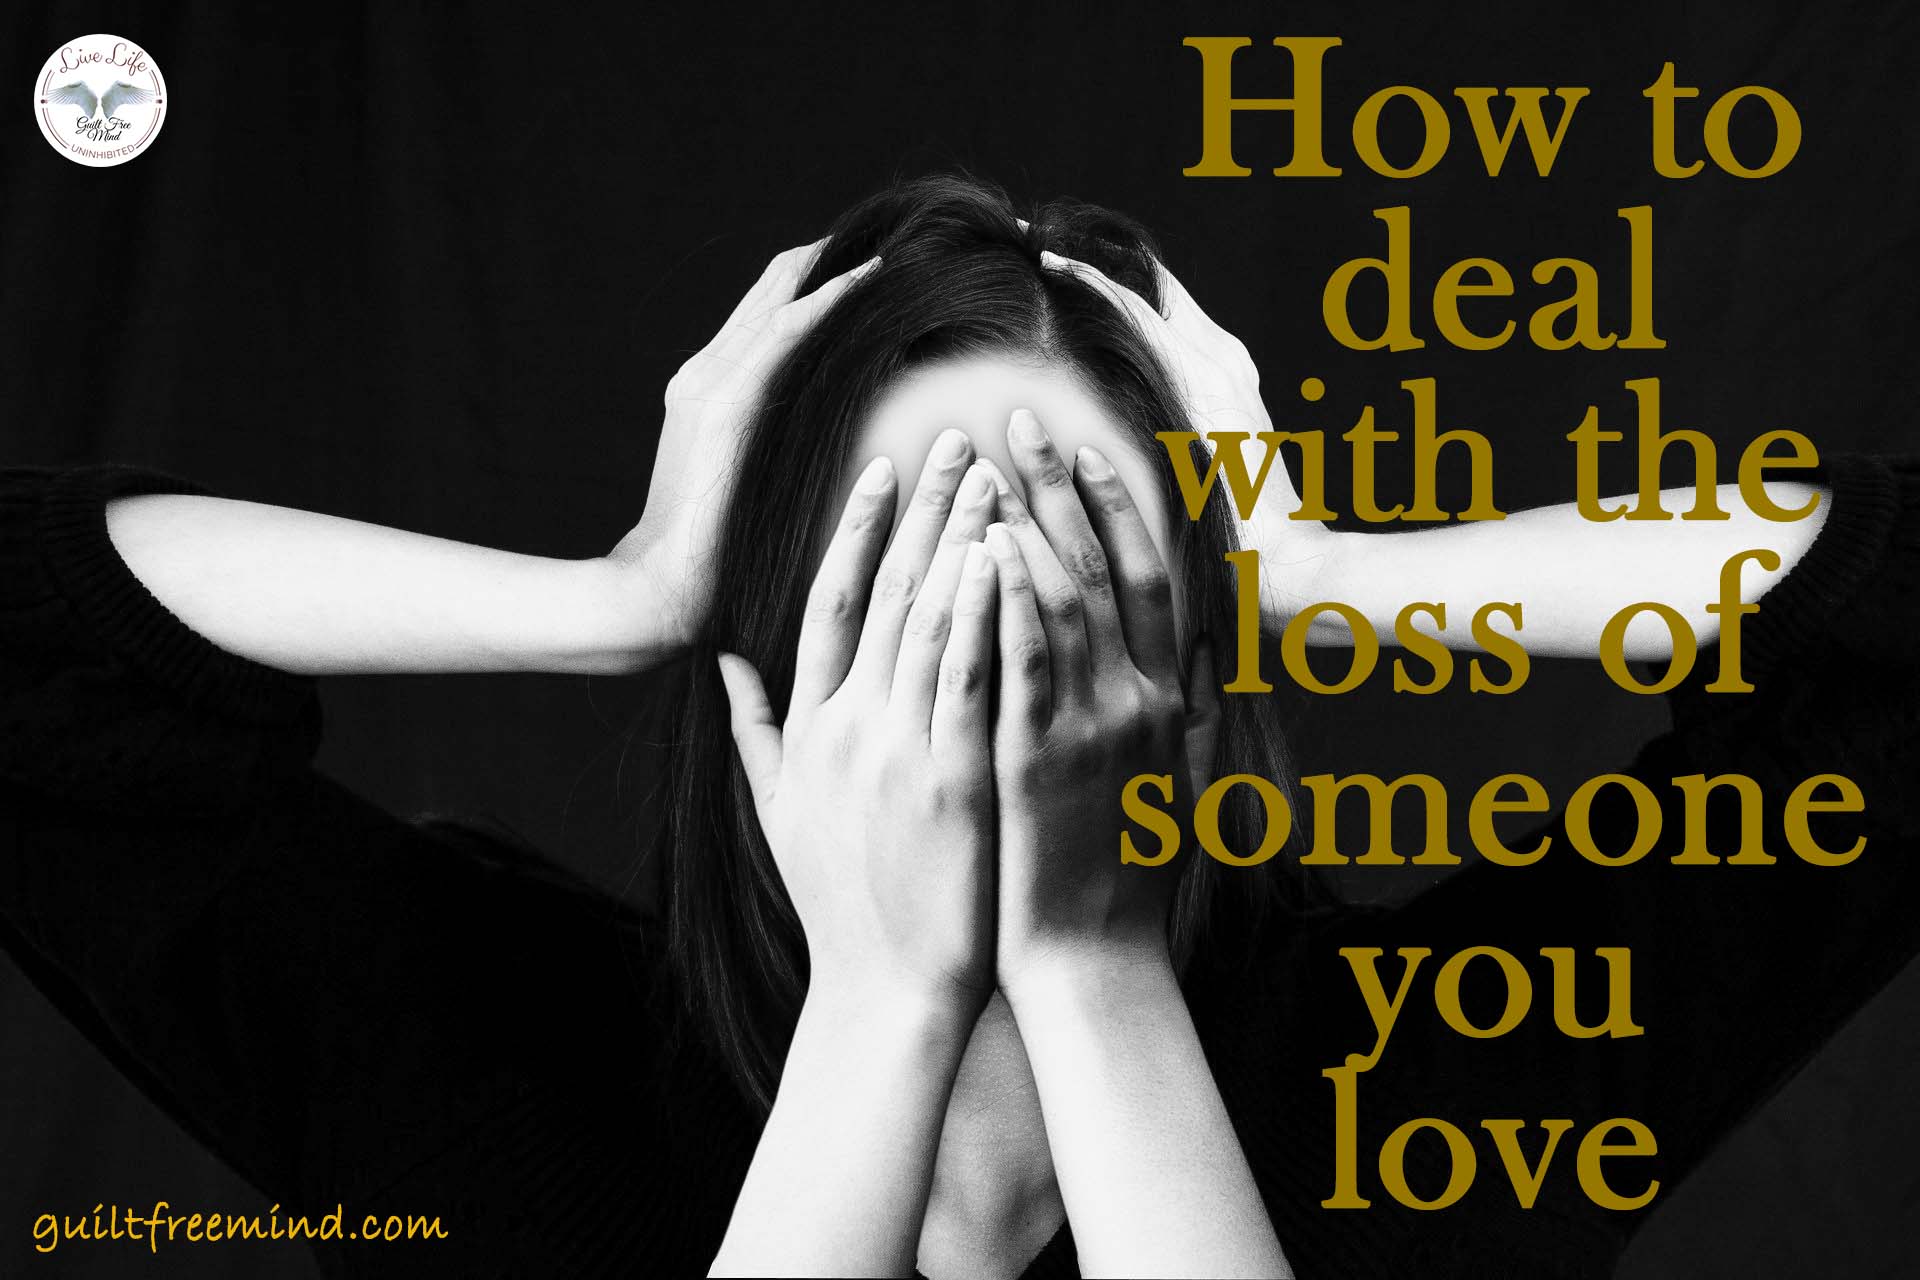 Dealing with the loss of someone you love: 16 tips